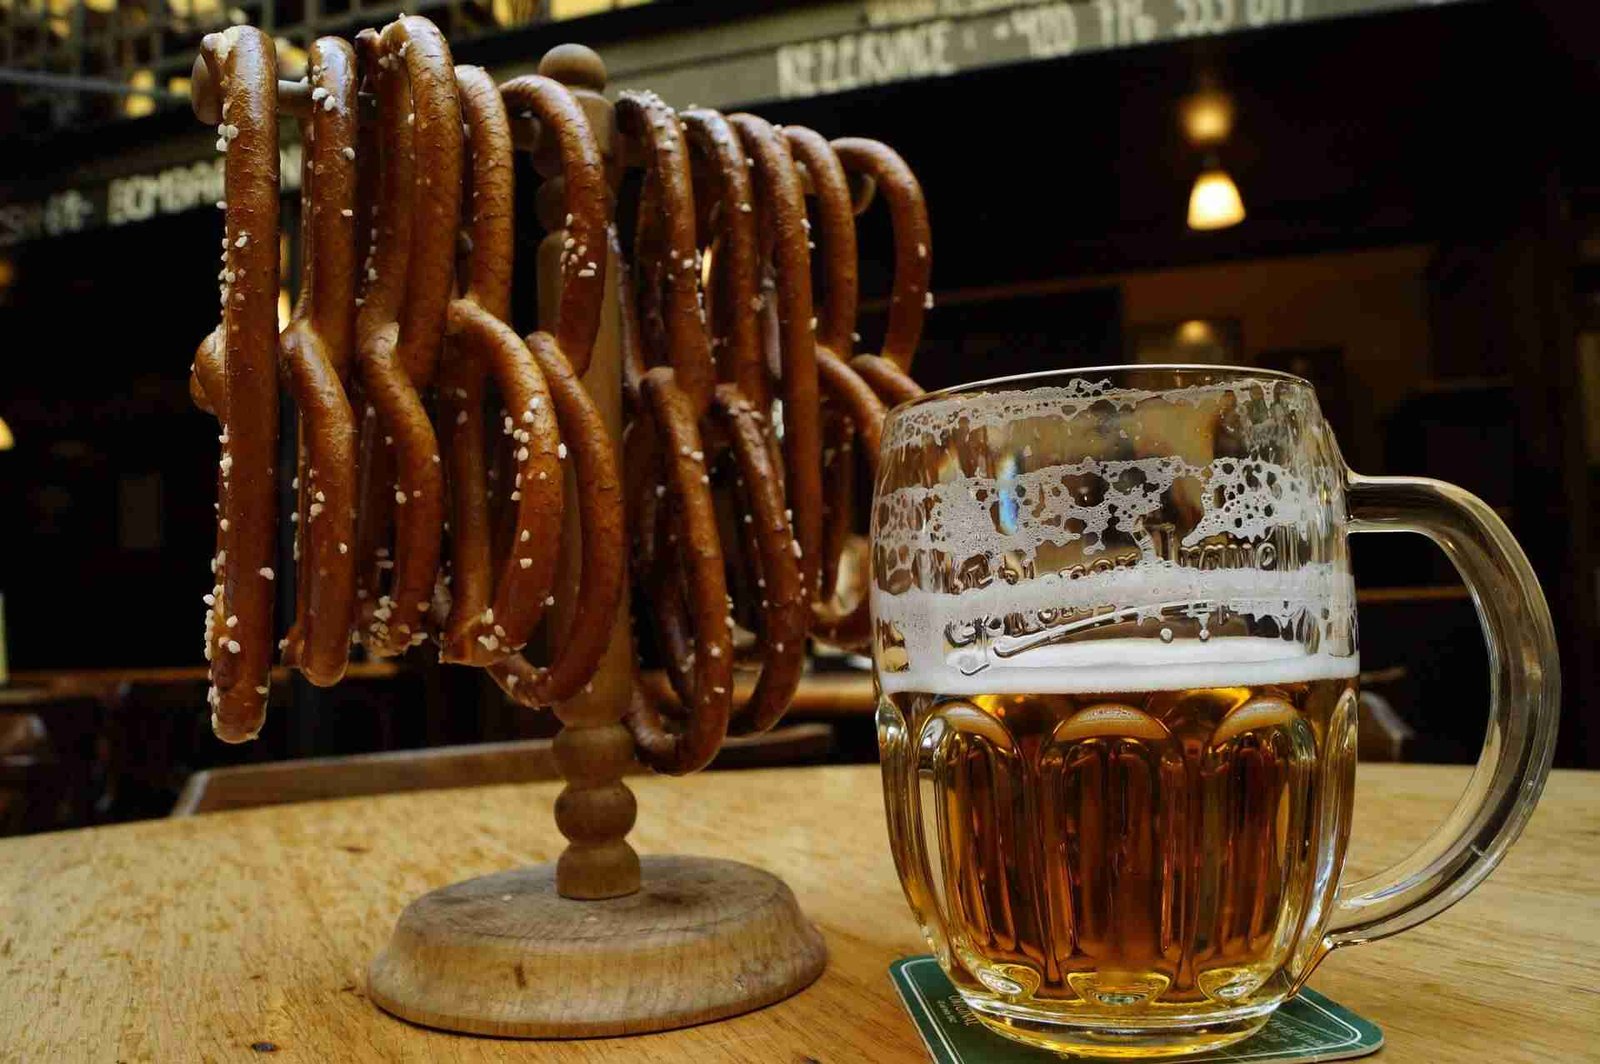 Pretzels for snacking with beer